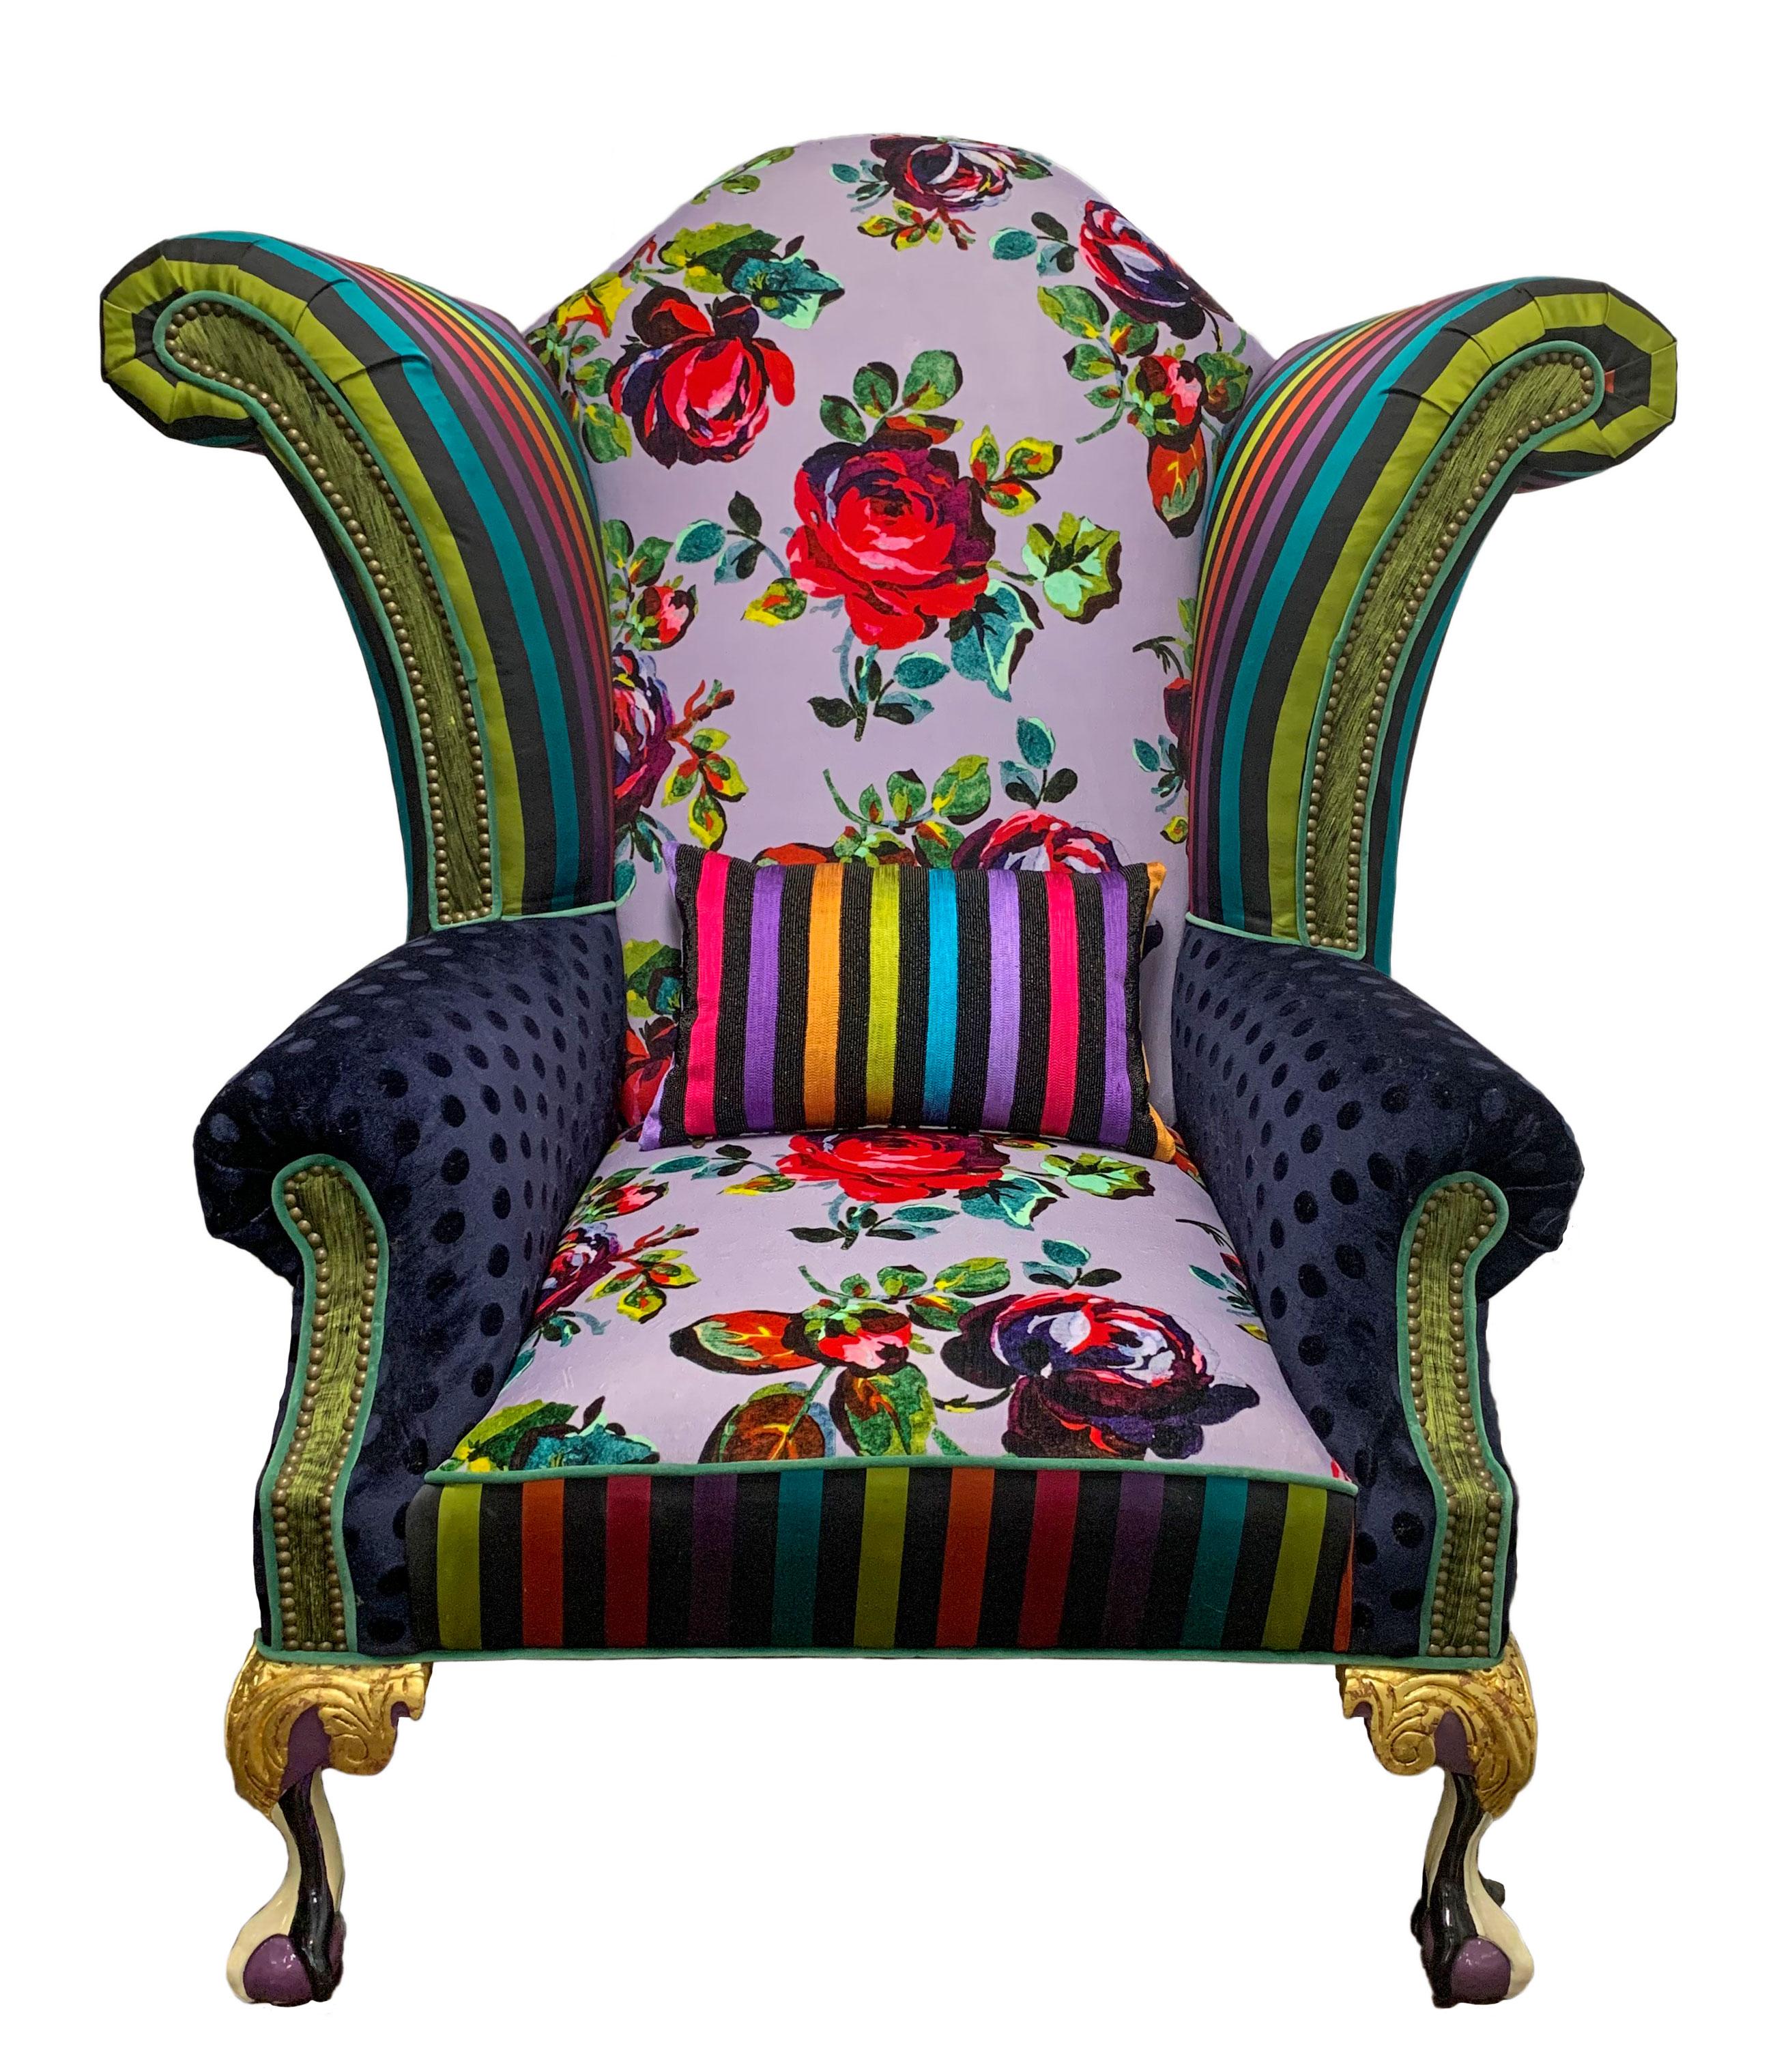 Iconic Mackenzie-Childs monumental armchair in zany eye-popping florals, stripes and dots. Upholstered in luxurious textural fabrics with hand carved claw-foot legs that are gold-leafed and hand painted by their artisans in Aurora, New York.